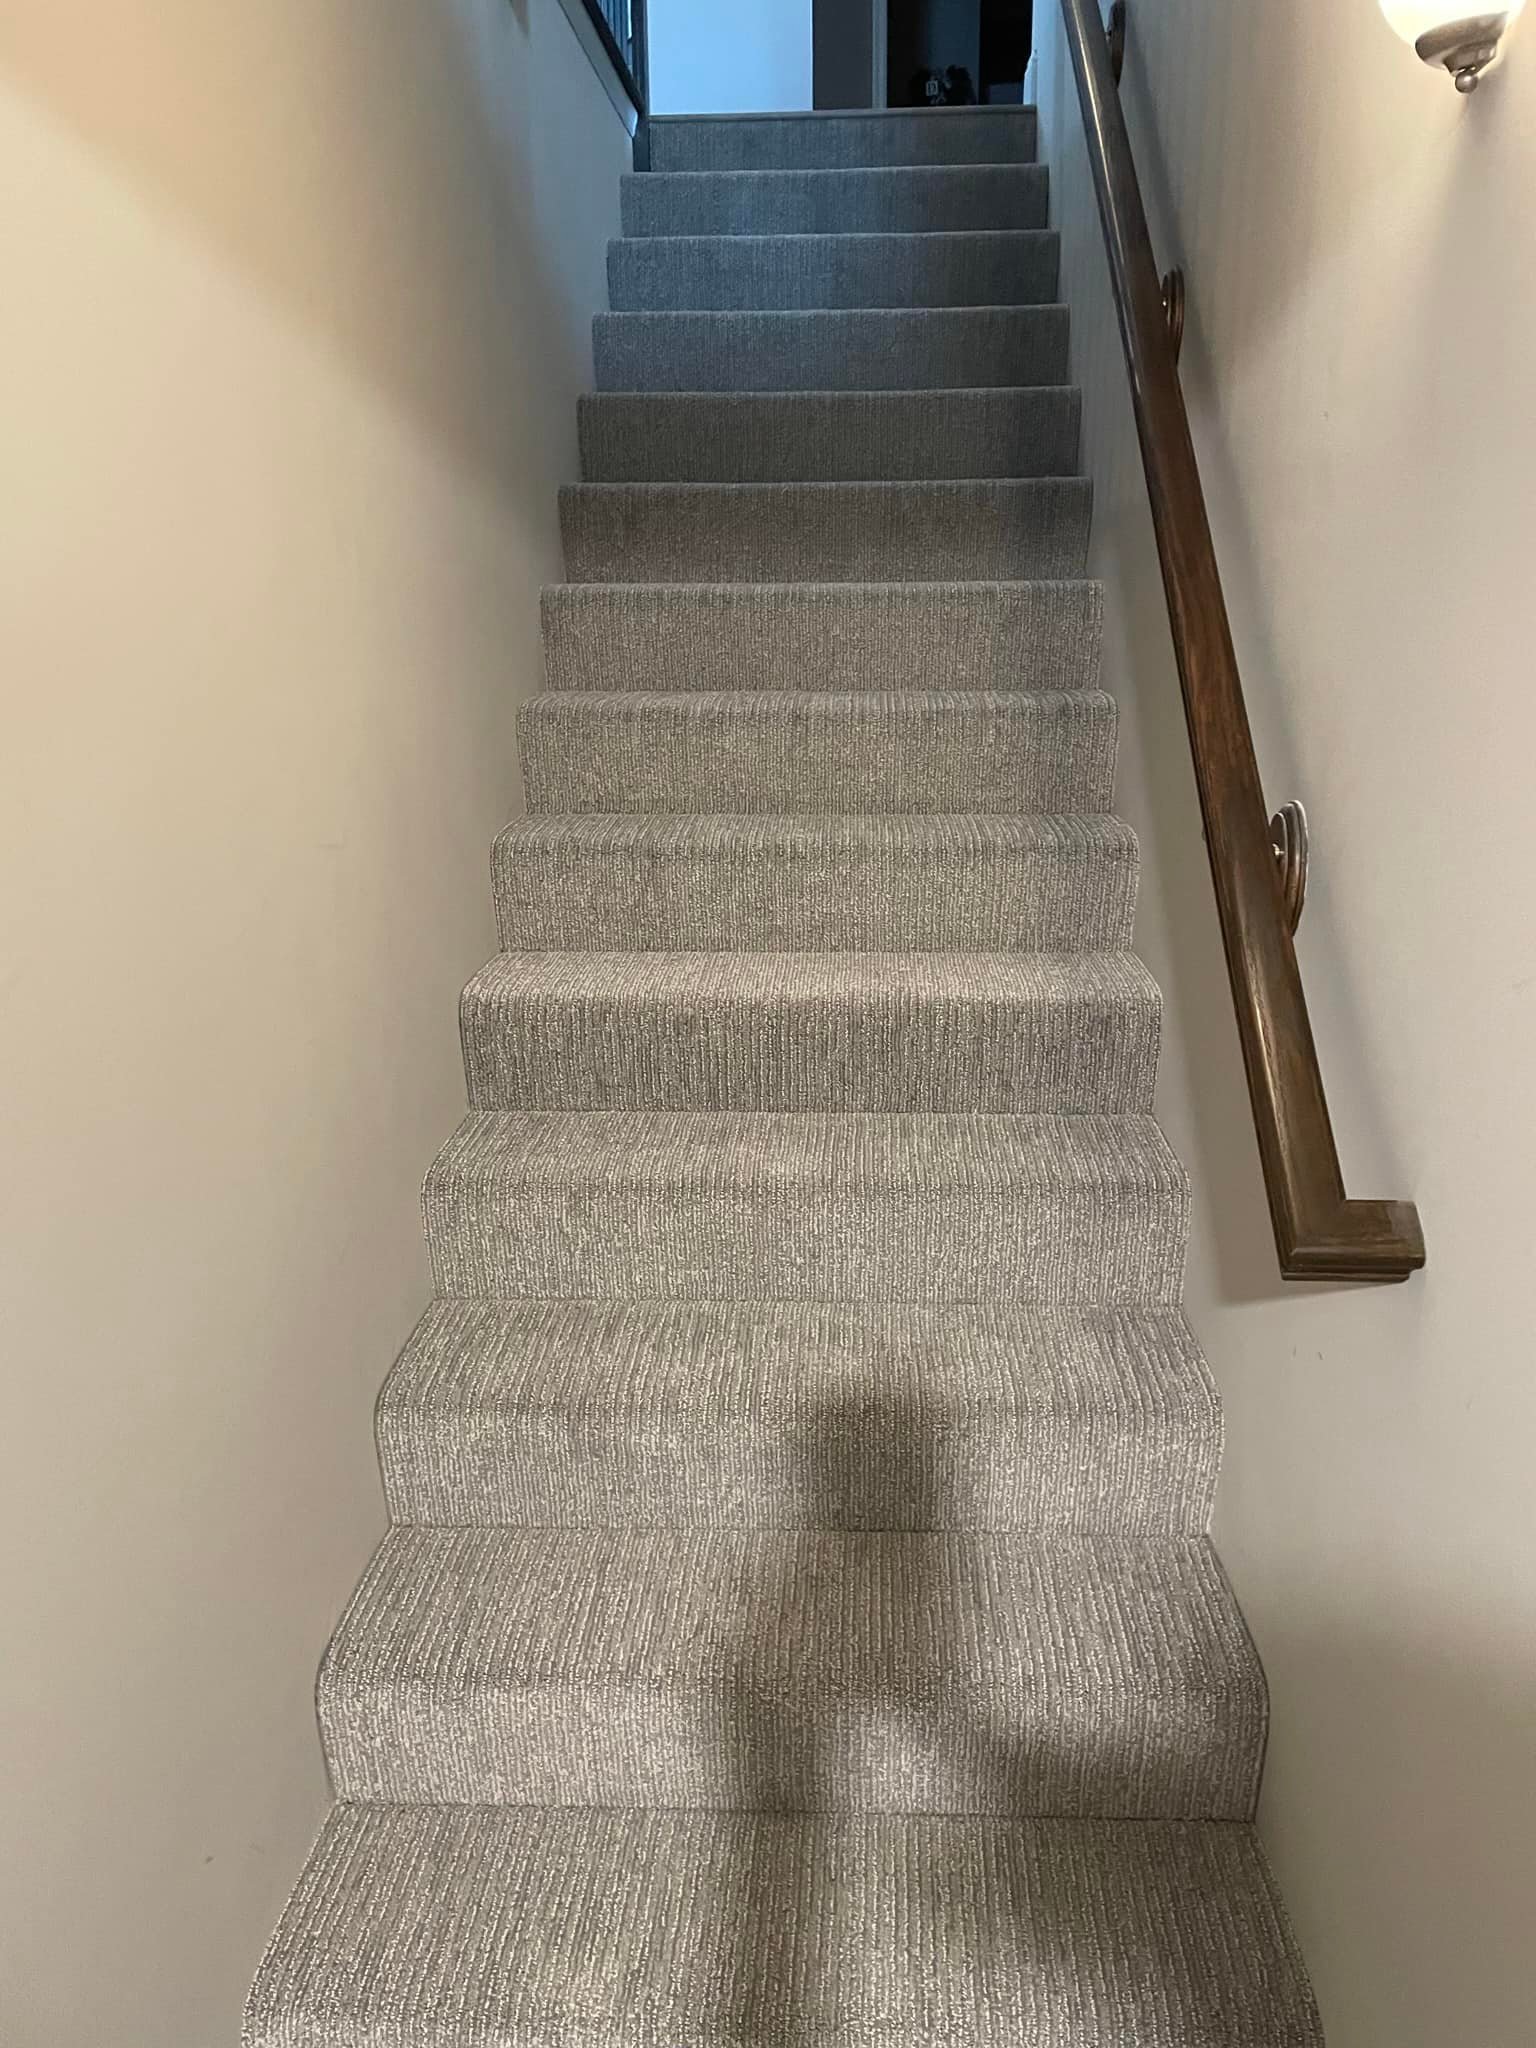 Chesterfield, MO Carpet on Stairs